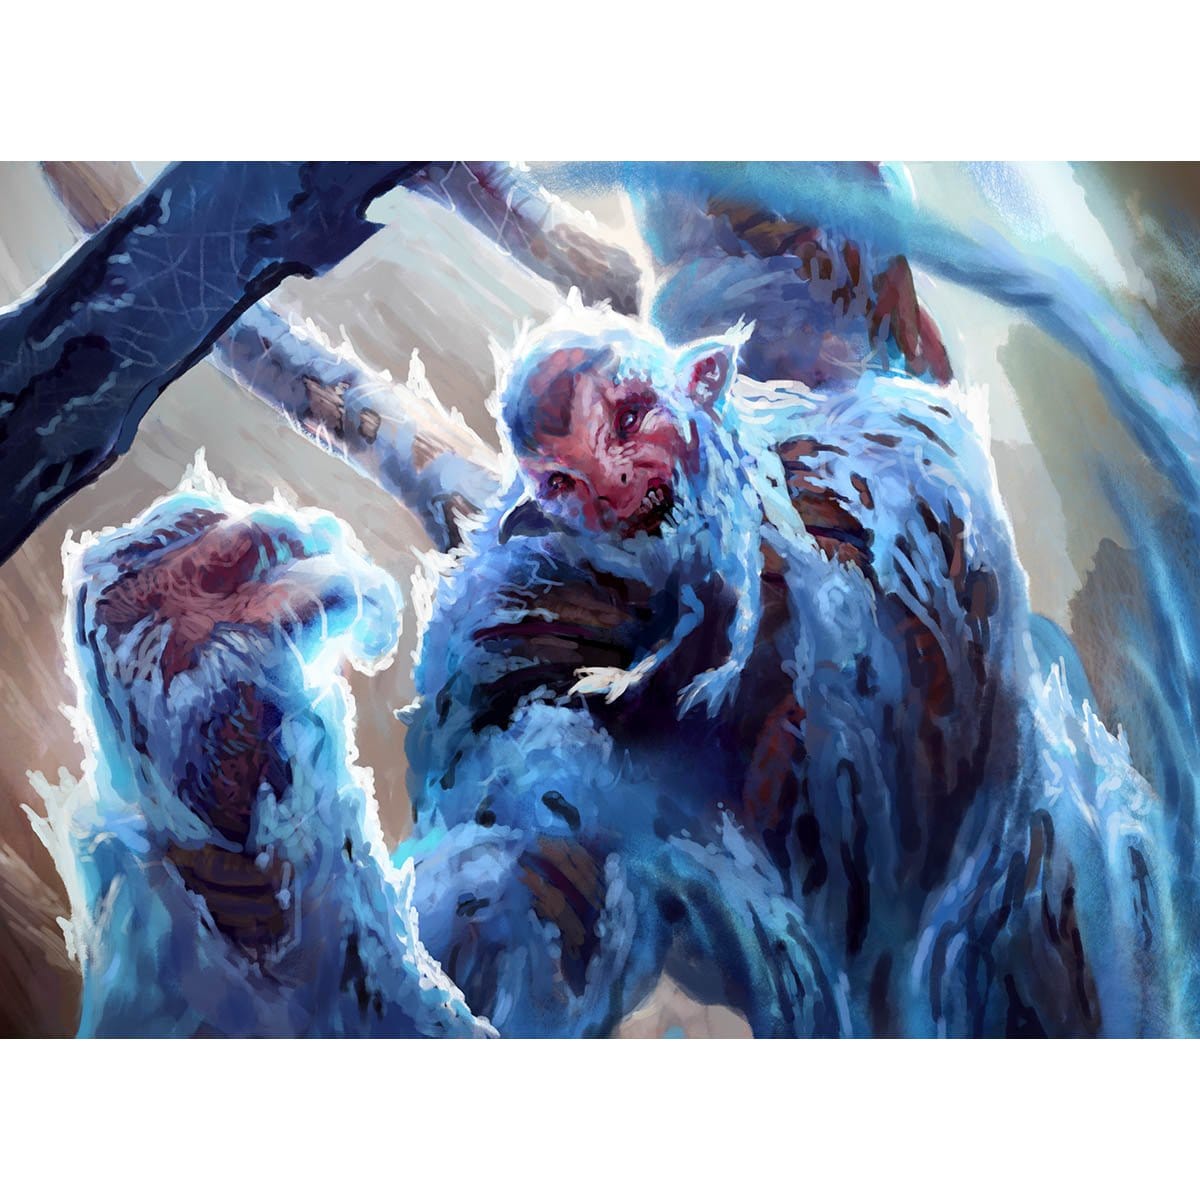 Crippling Chill Print - Print - Original Magic Art - Accessories for Magic the Gathering and other card games